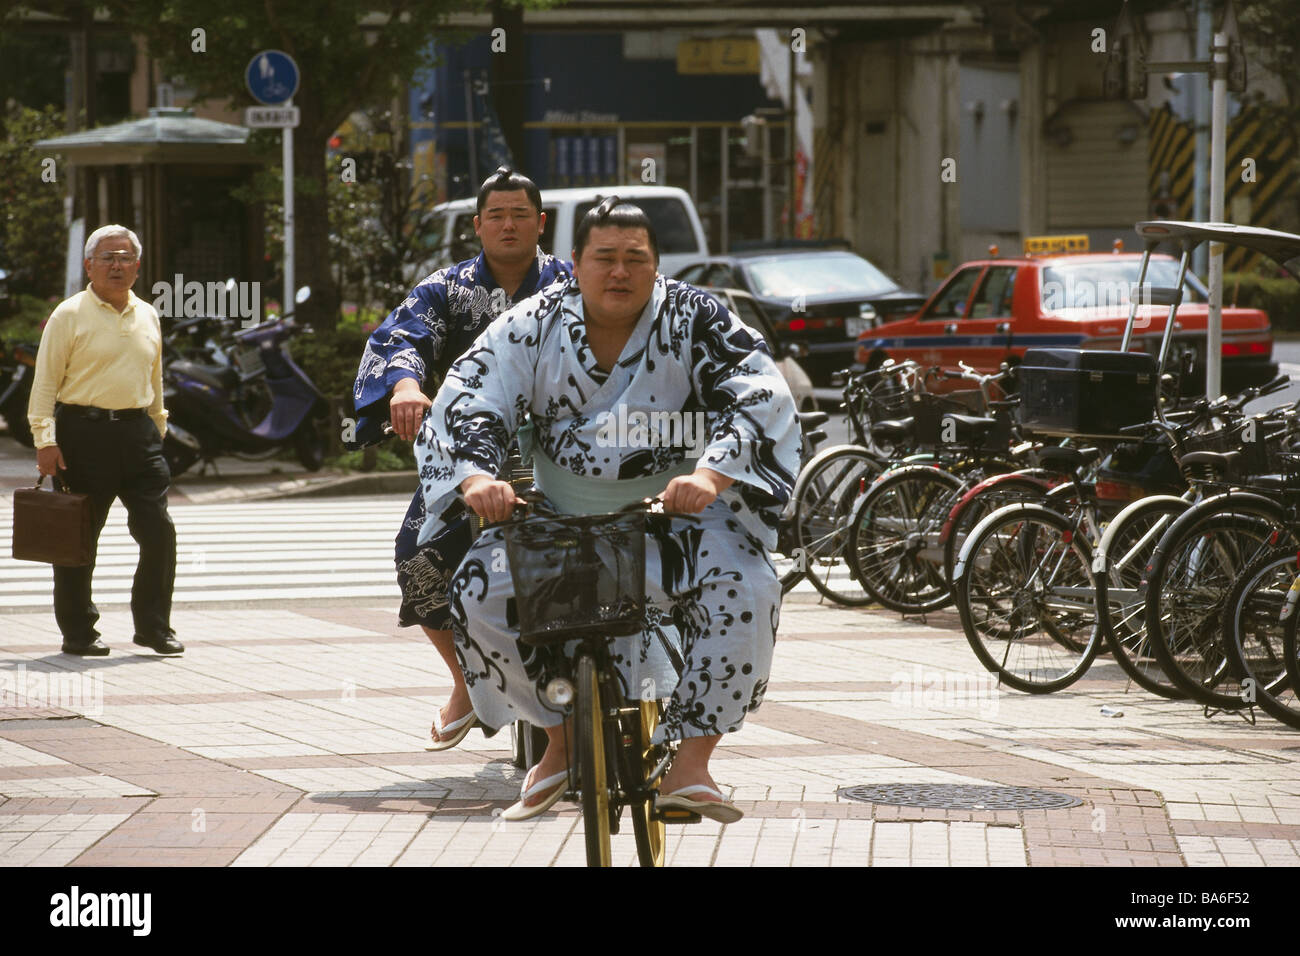 Tokyo Japan Sumo-Ringer bicycles consecutively no models release Asia people men Sumoringer wrestlers traditionally bicycles Stock Photo